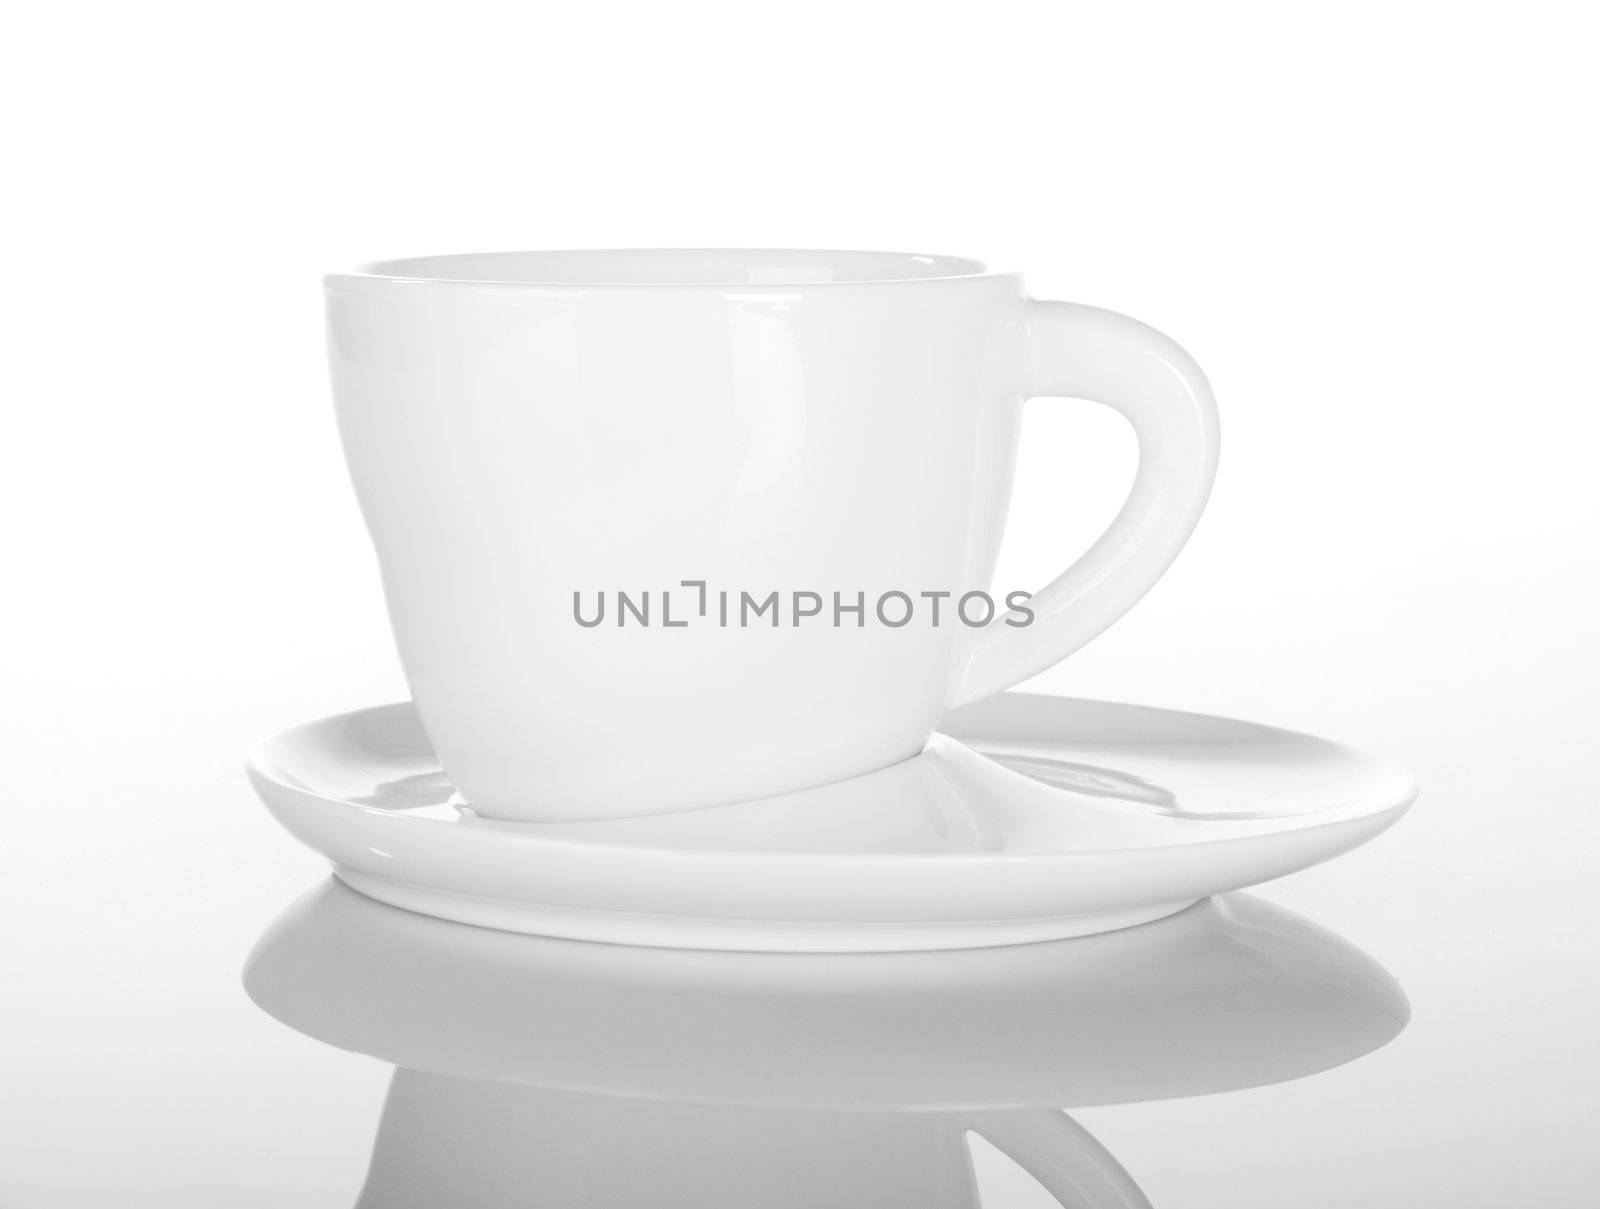 Empty cup of tea on white with reflection